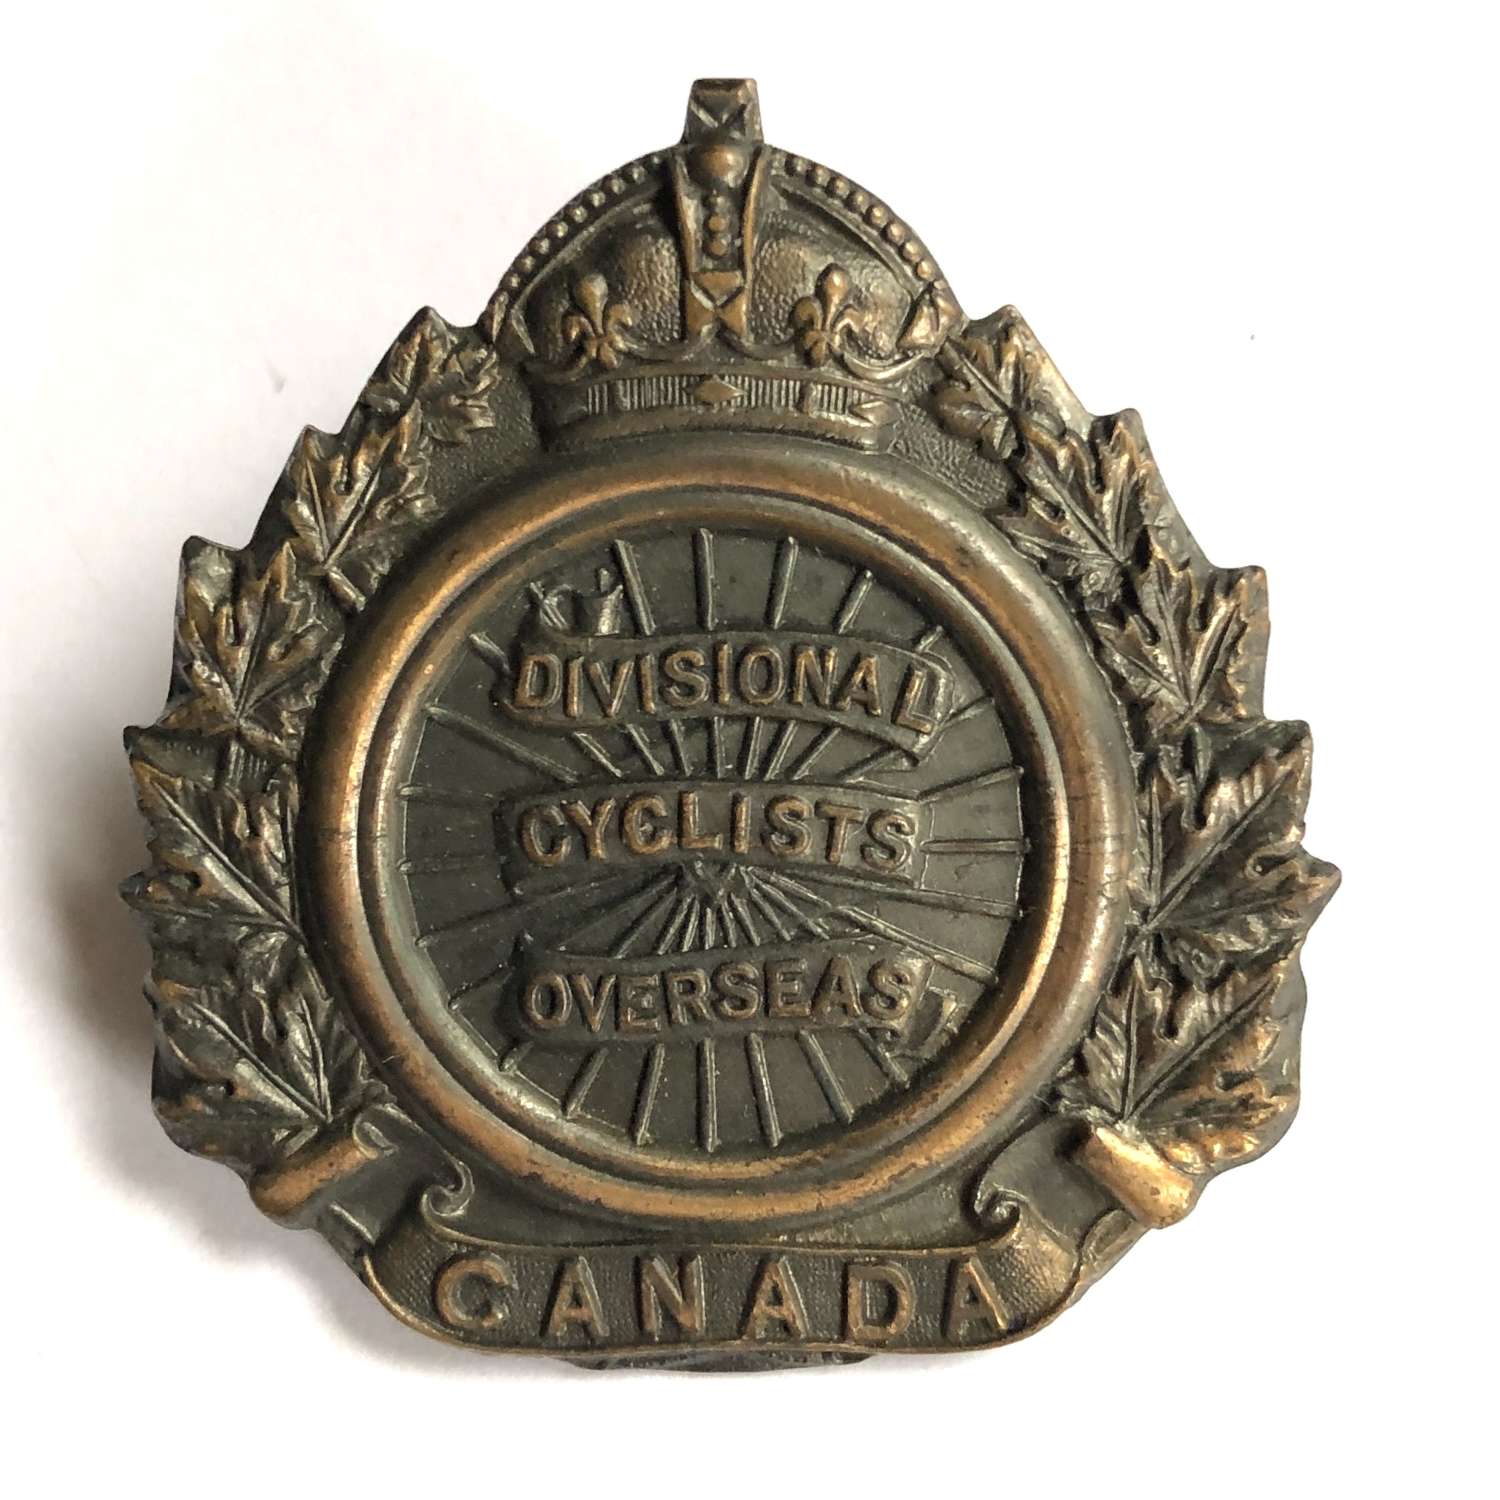 Canadian 1st Divisional Cyclist Battalion cap badge by Roden Bros